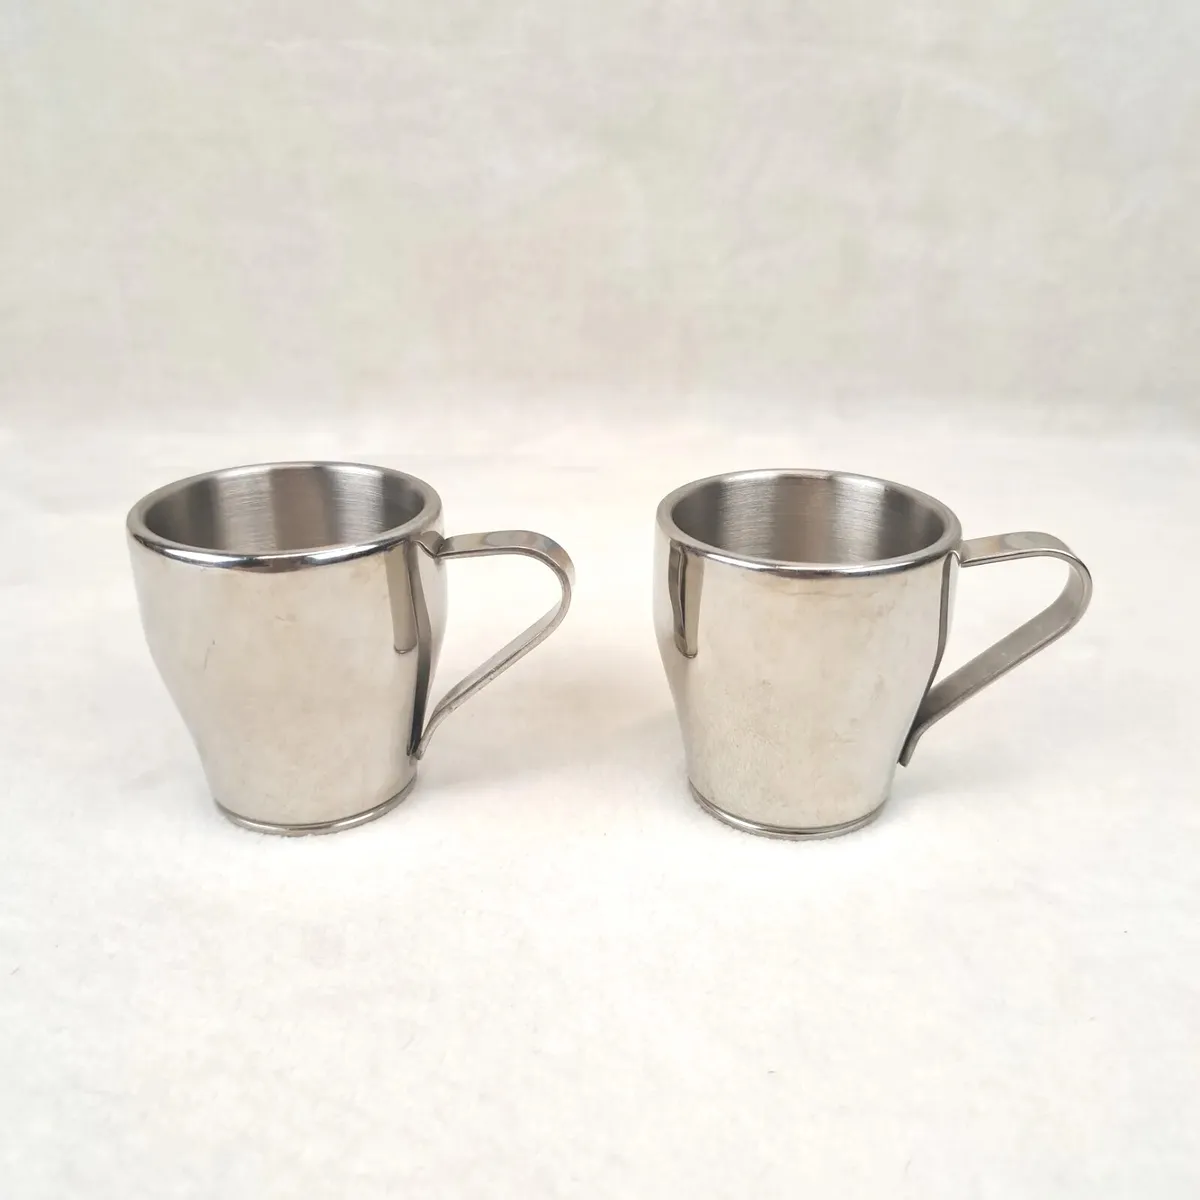 2 Breville Cafe Roma Stainless Steel Insulated Espresso Cups Mugs